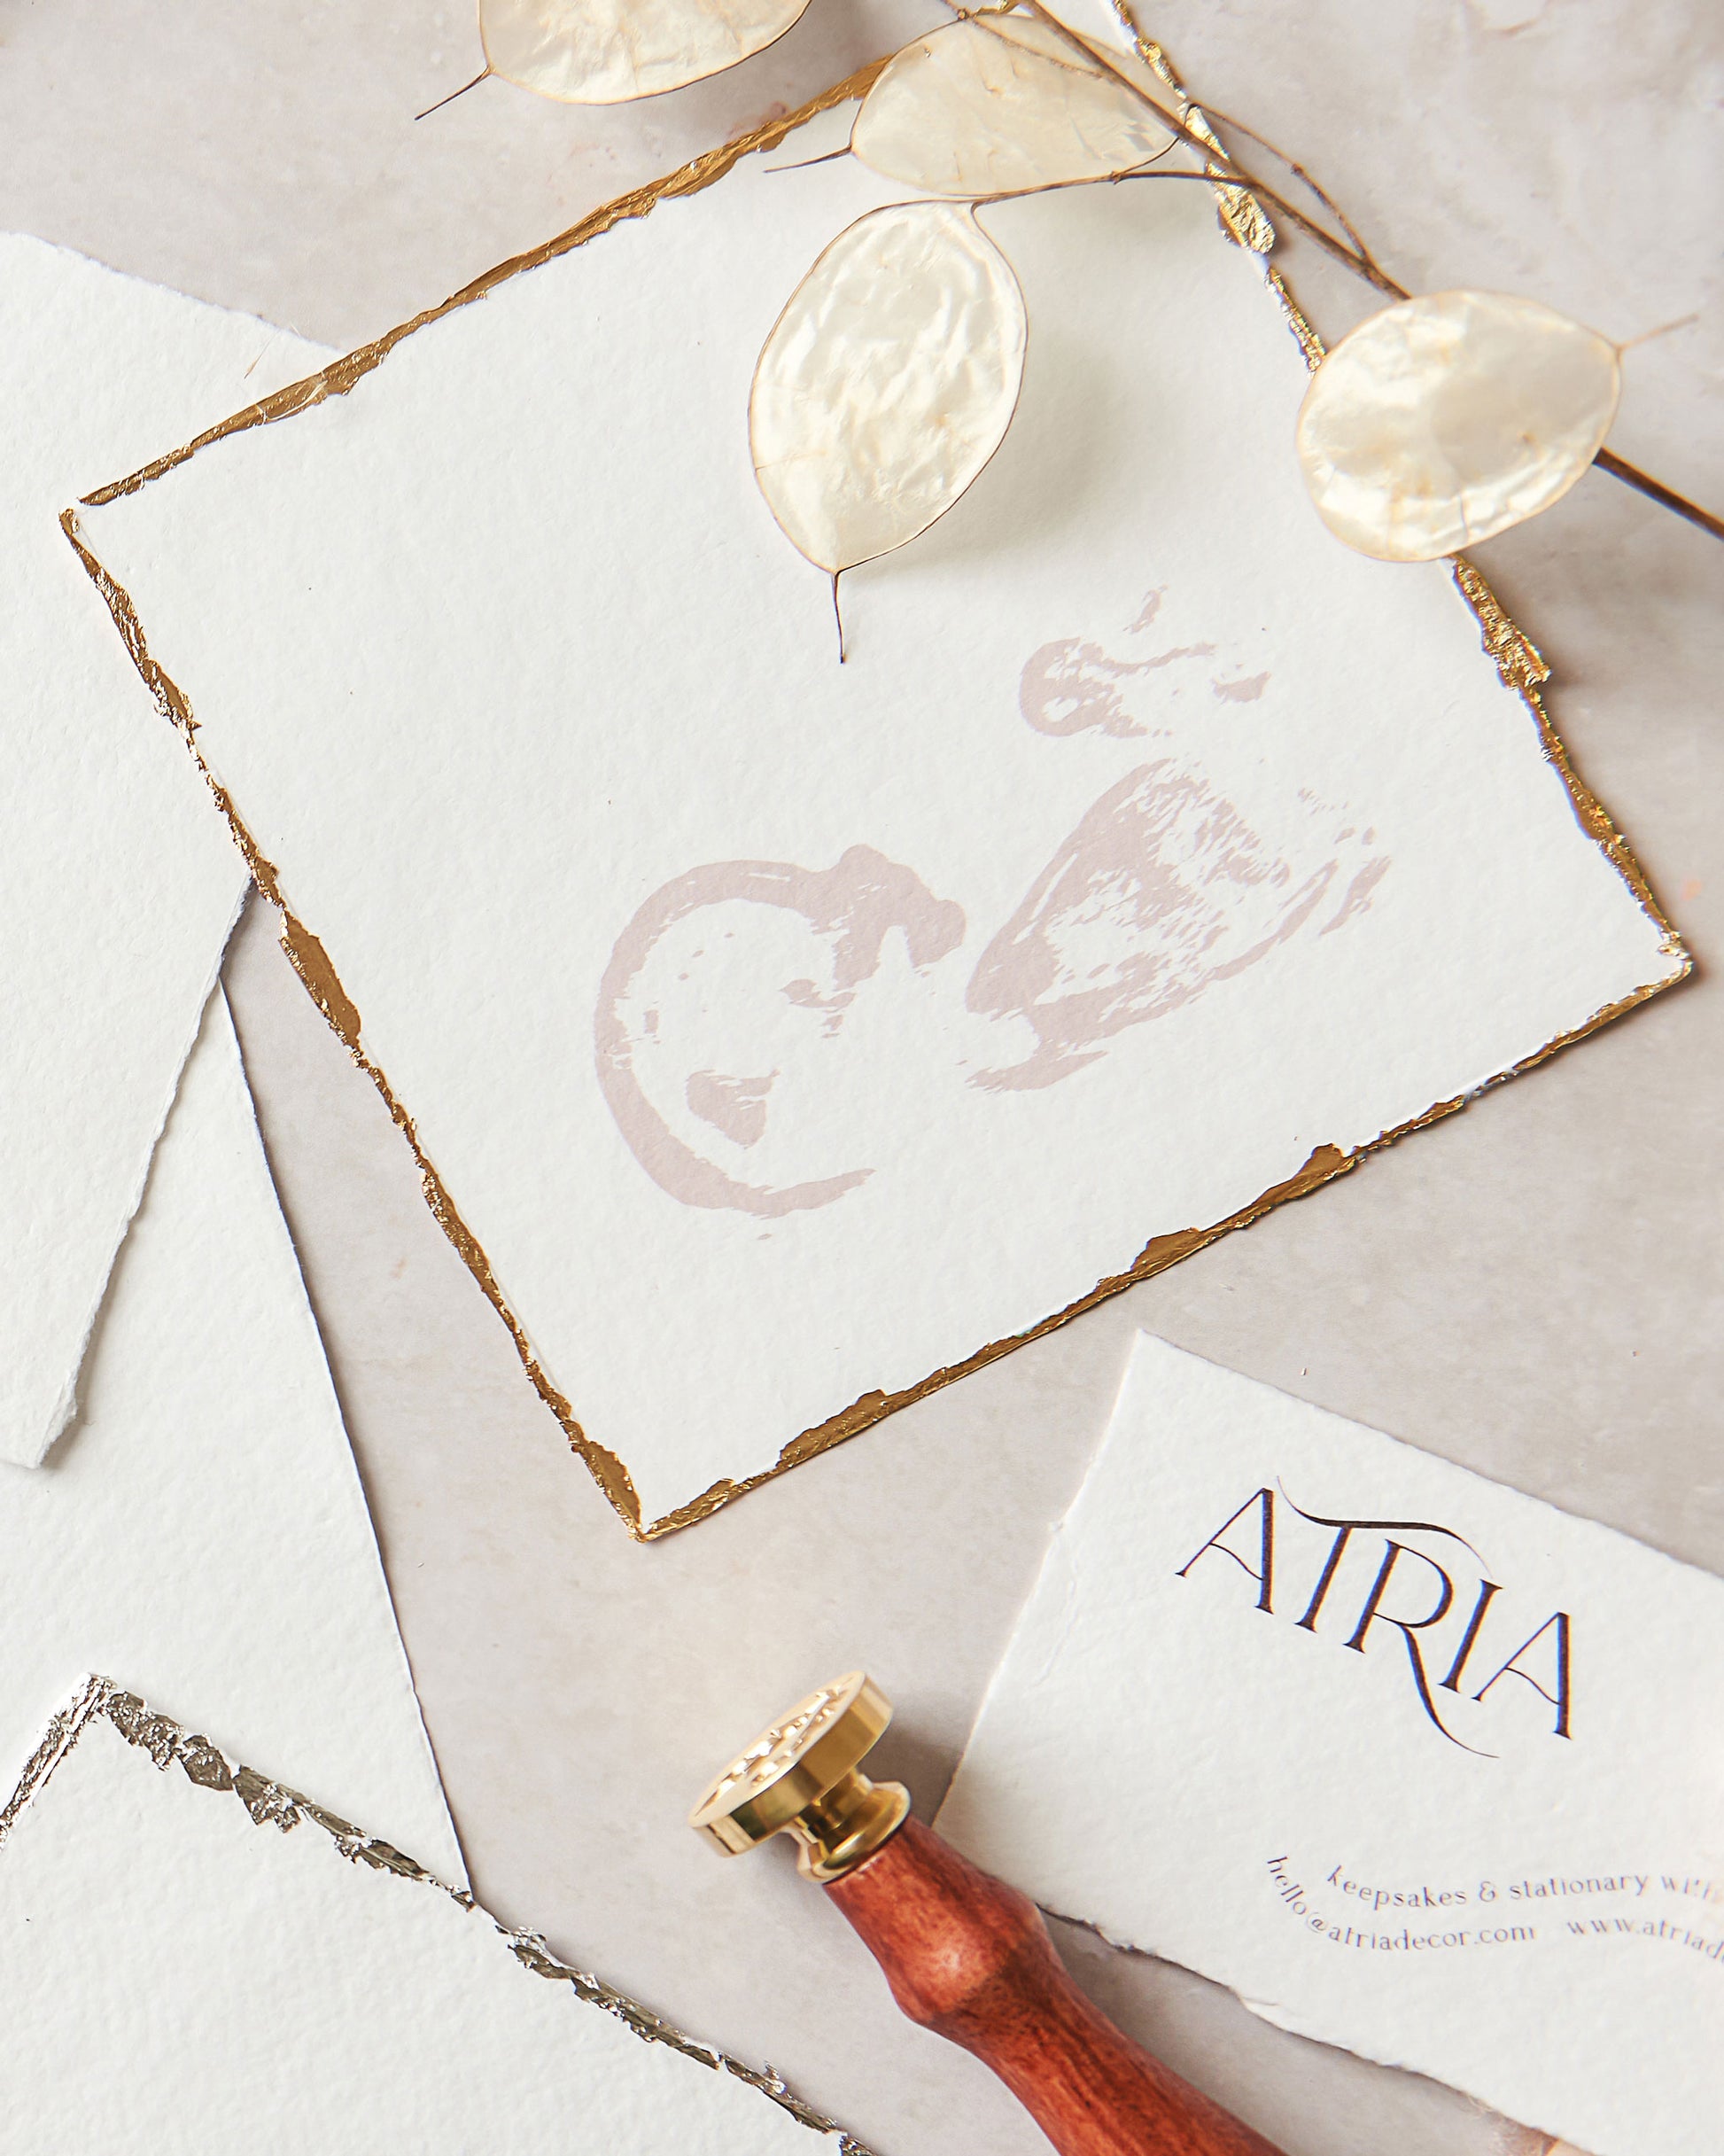 A close up photograph of a baby scan keepsake on white handmade paper, with gold leaf gilt deckle edges and the silhouette of the baby printed in a light dusky pink ink. Other handmade papers, a brass wax seal stamp and a dried stem of lunaria honesty surround the sentimental keepsake.